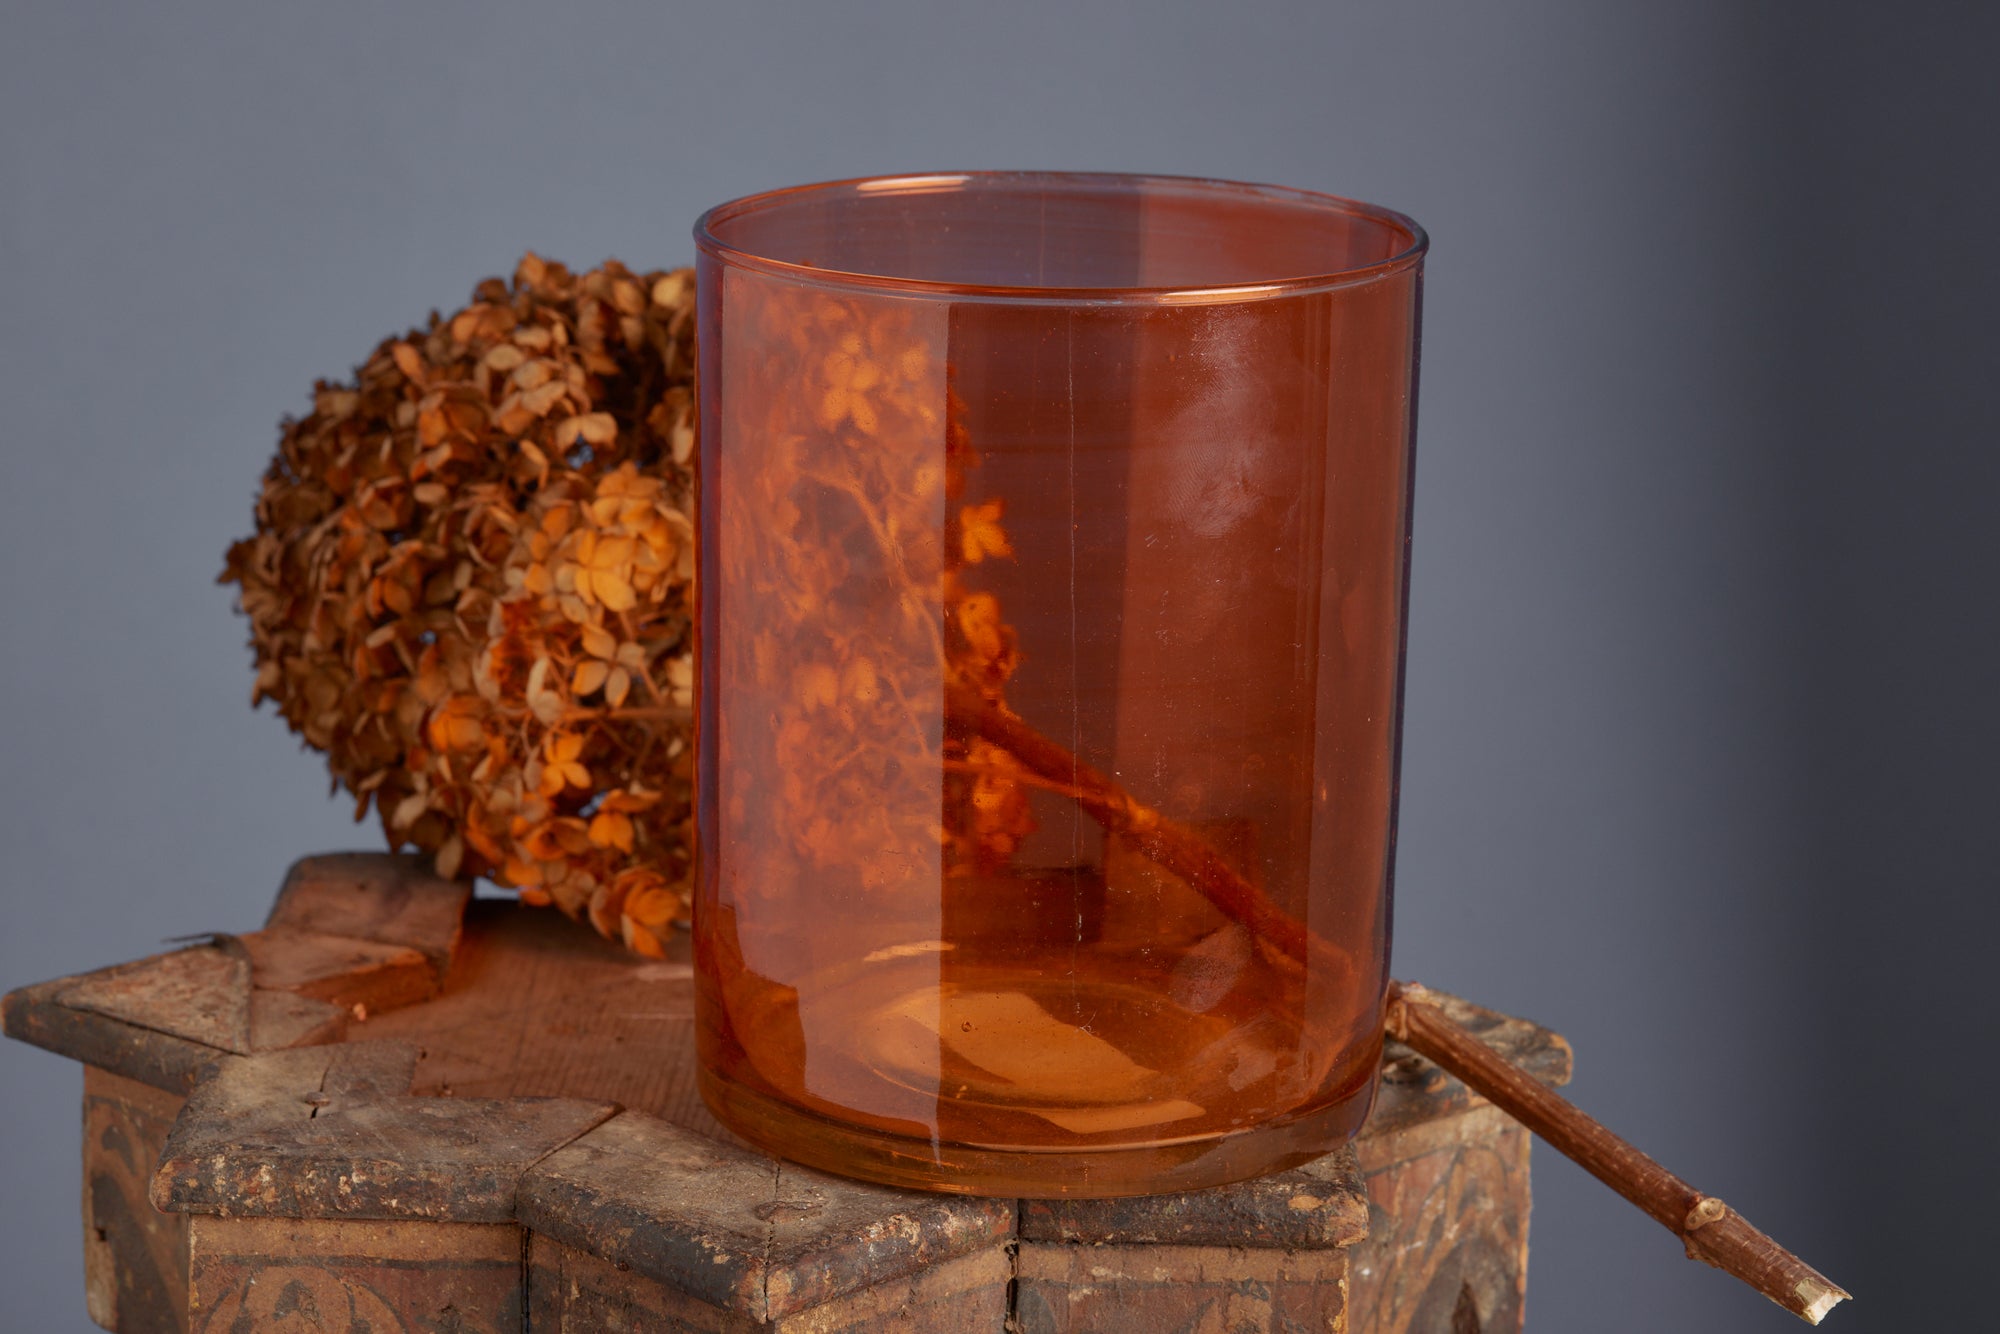 Hand Blown Apricot Colored Flashed Glass Vase from Marrakesh